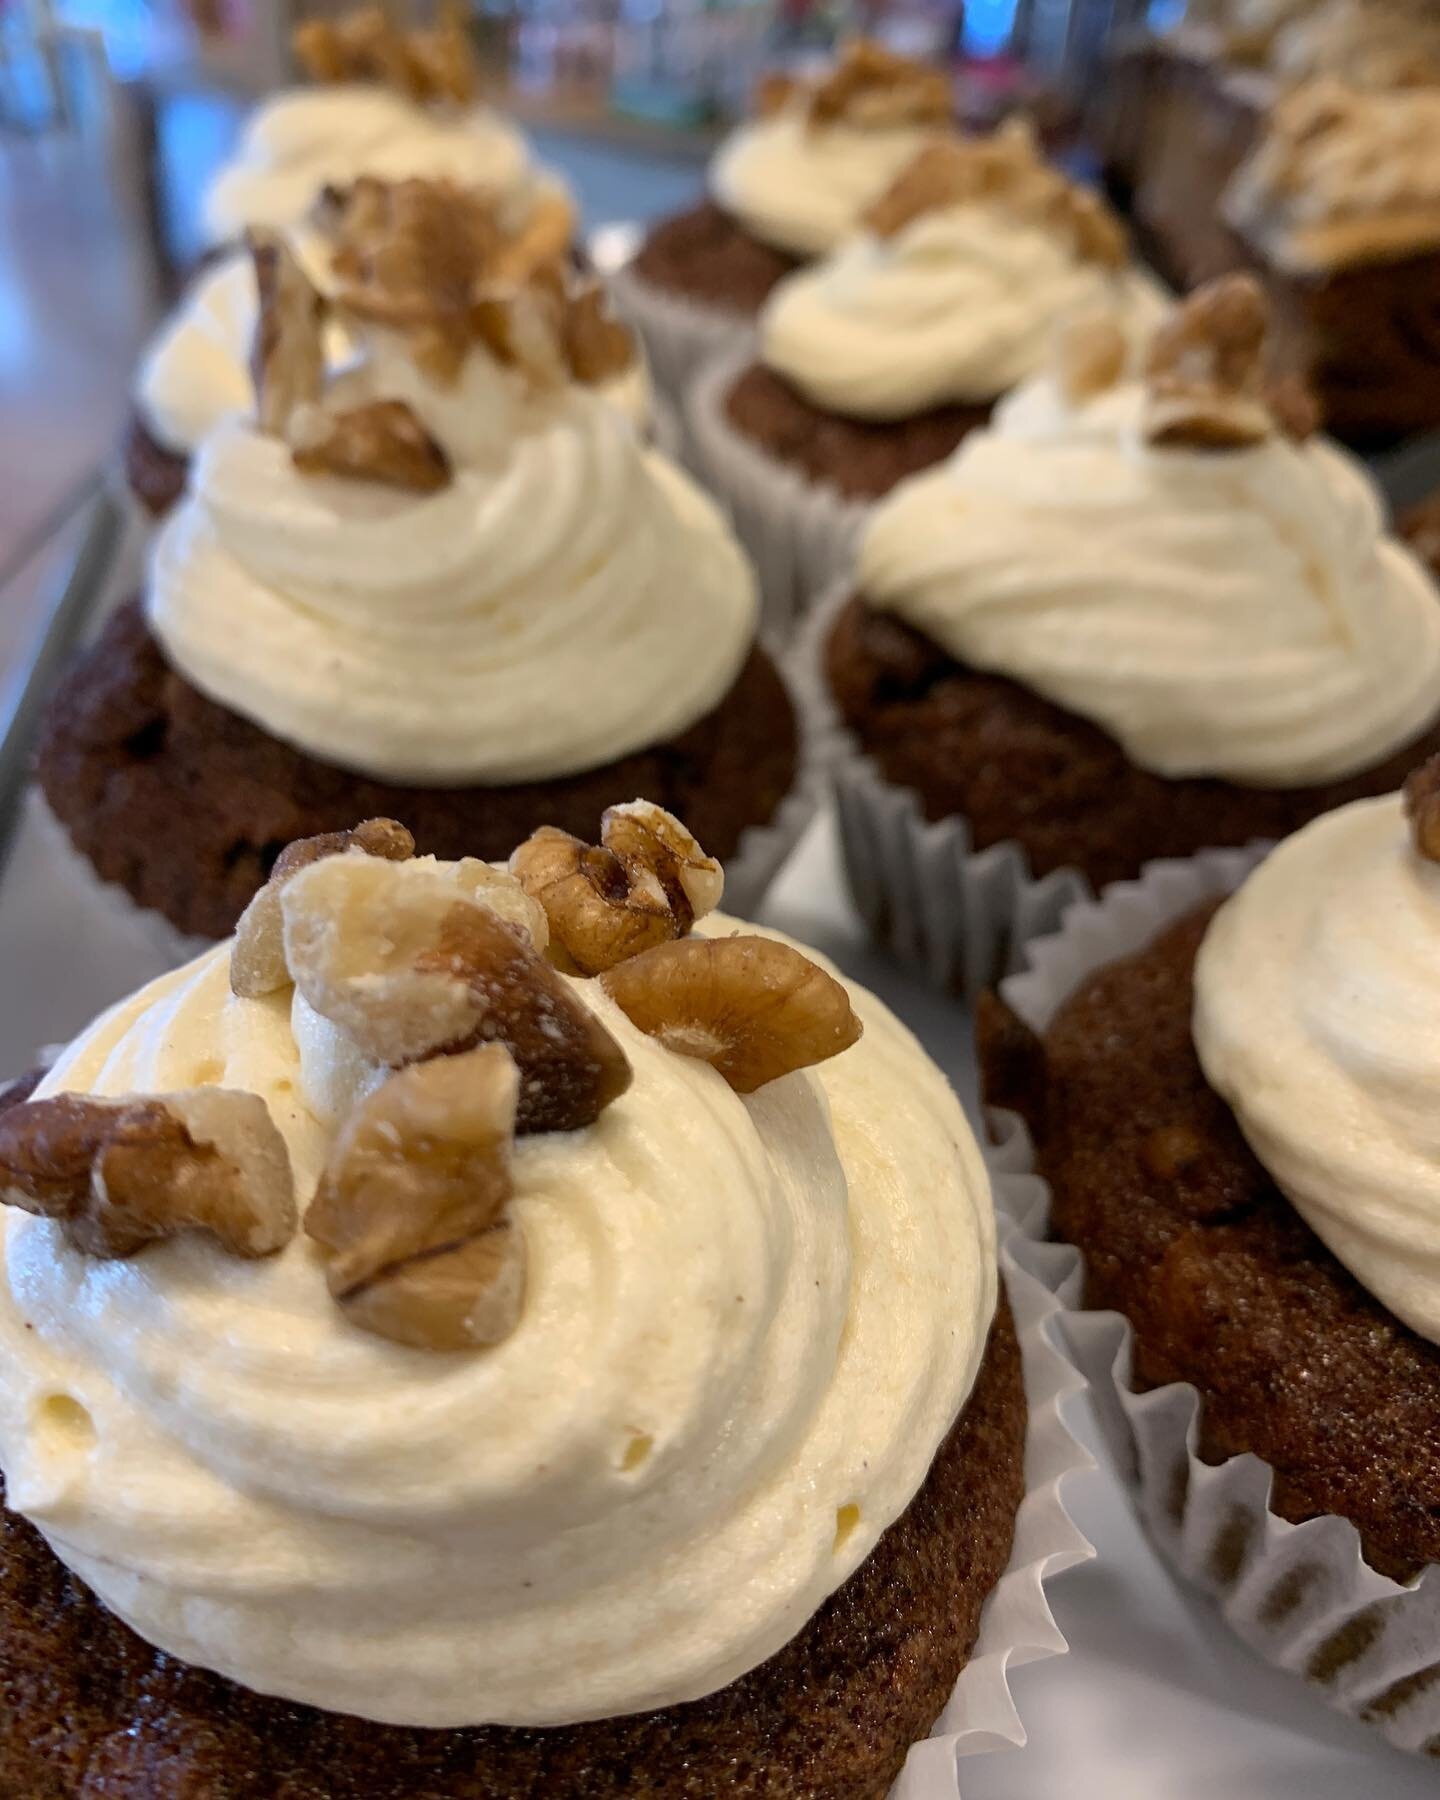 Carrot cake muffins on the counter today 
#carrotcake #muffins #cakeday